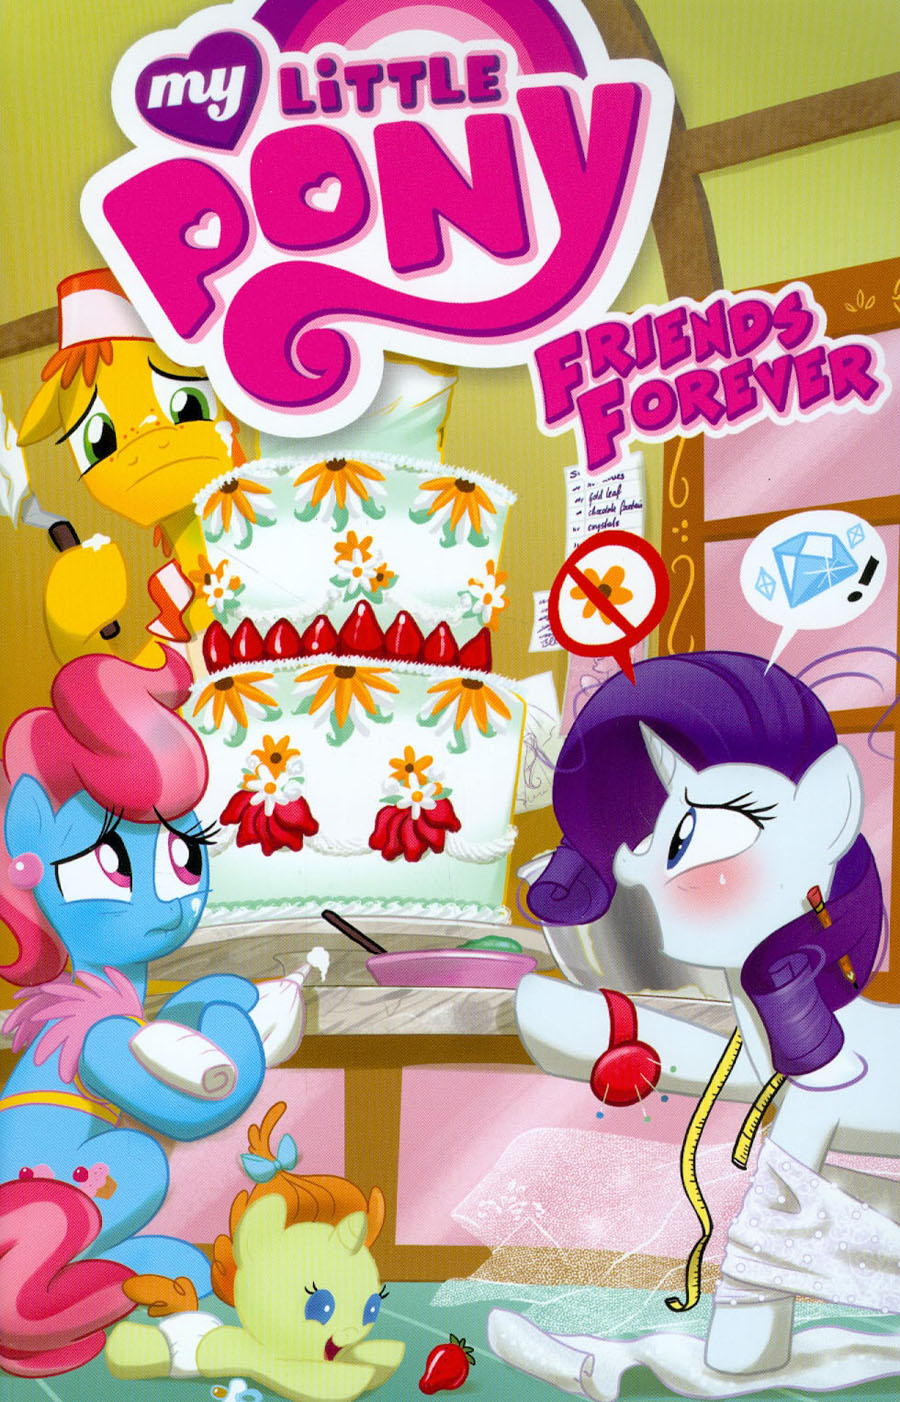 My Little Pony Friends Forever Vol 5 TP